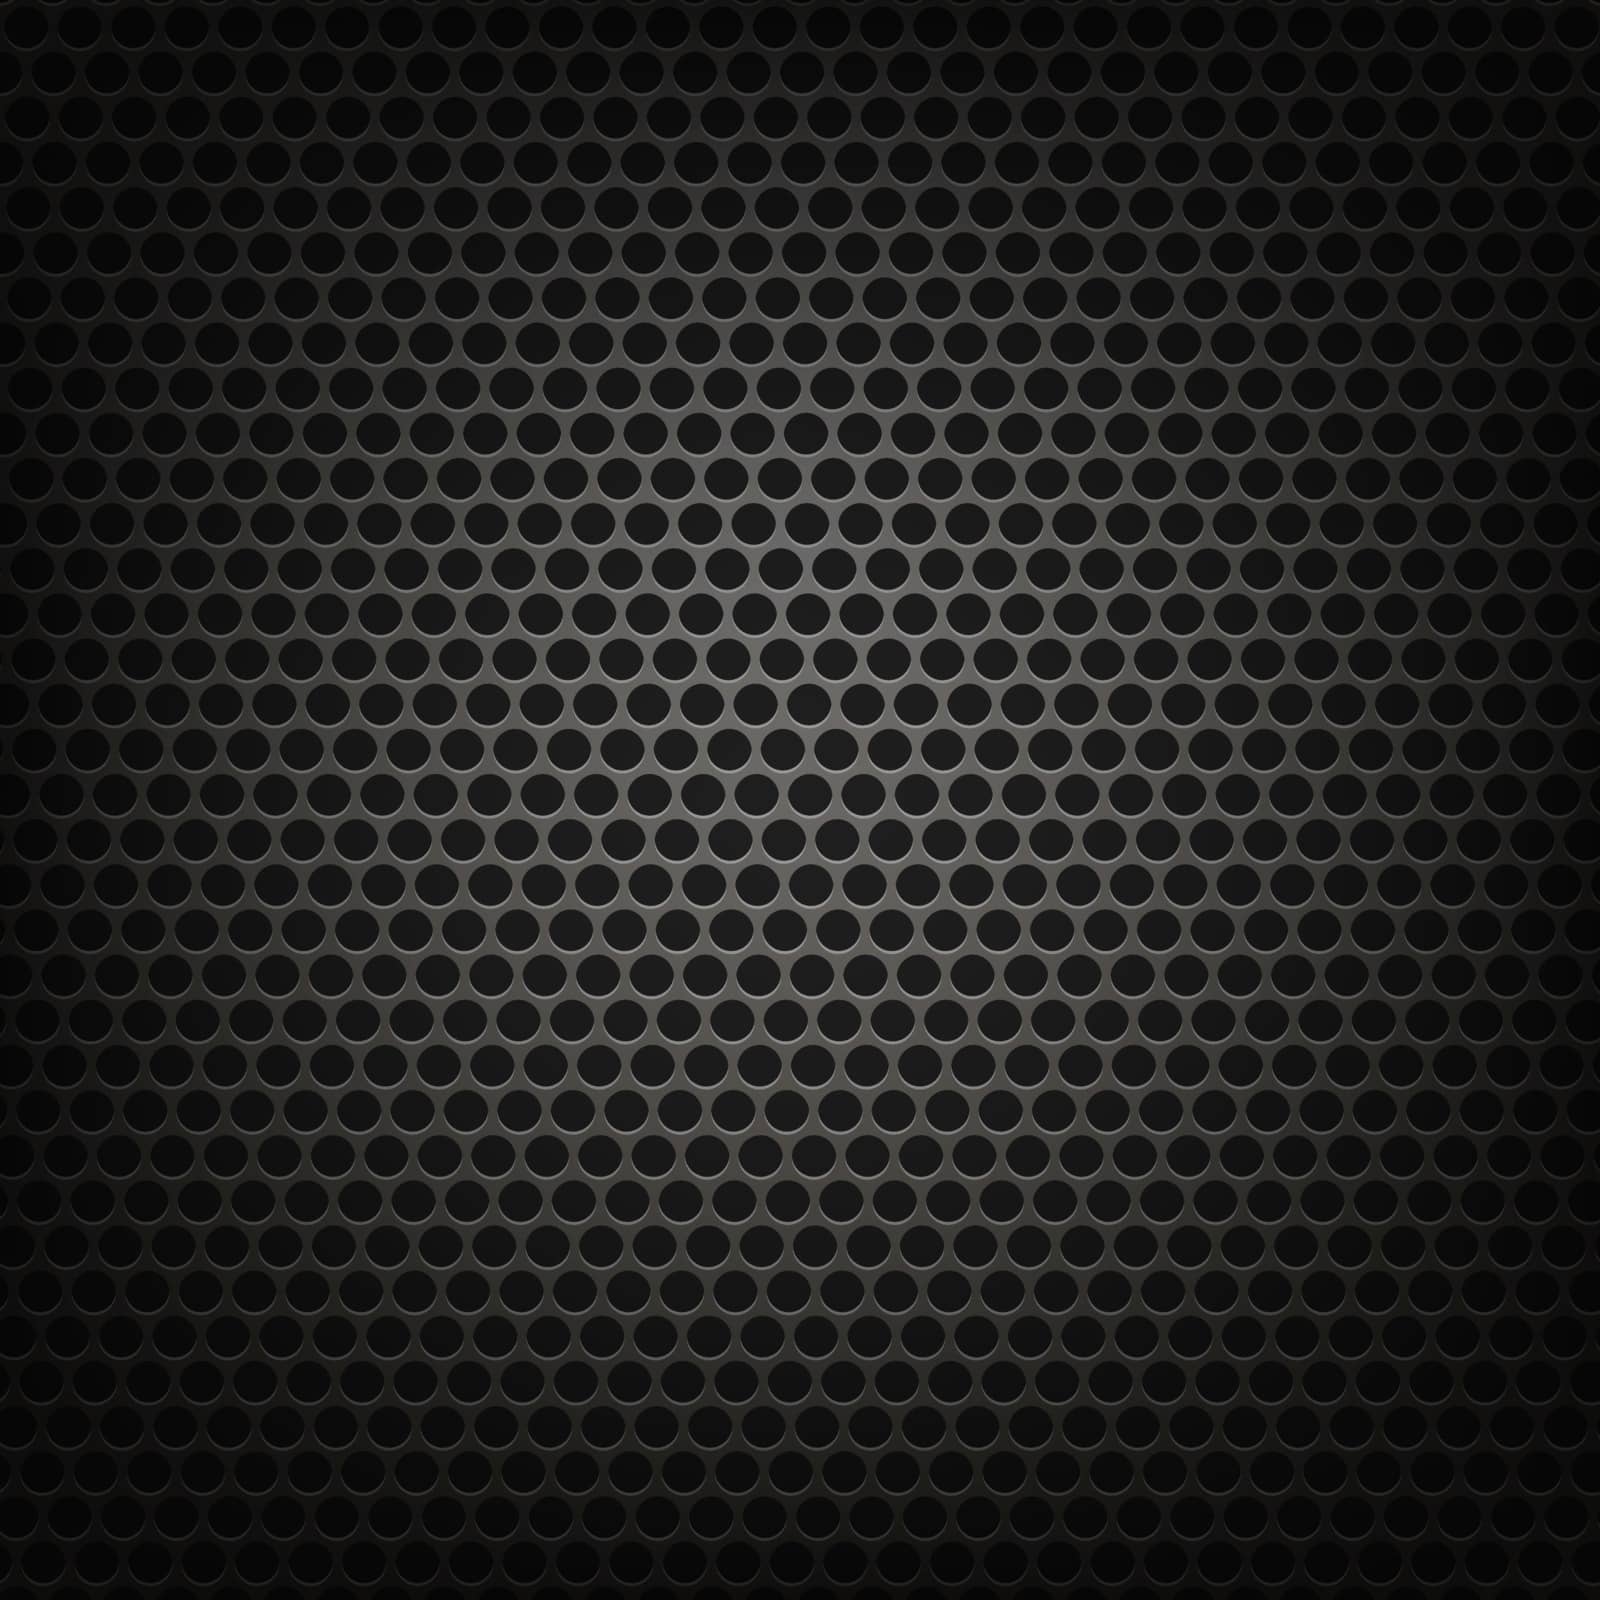 Metallic Perforated Background. by valeo5